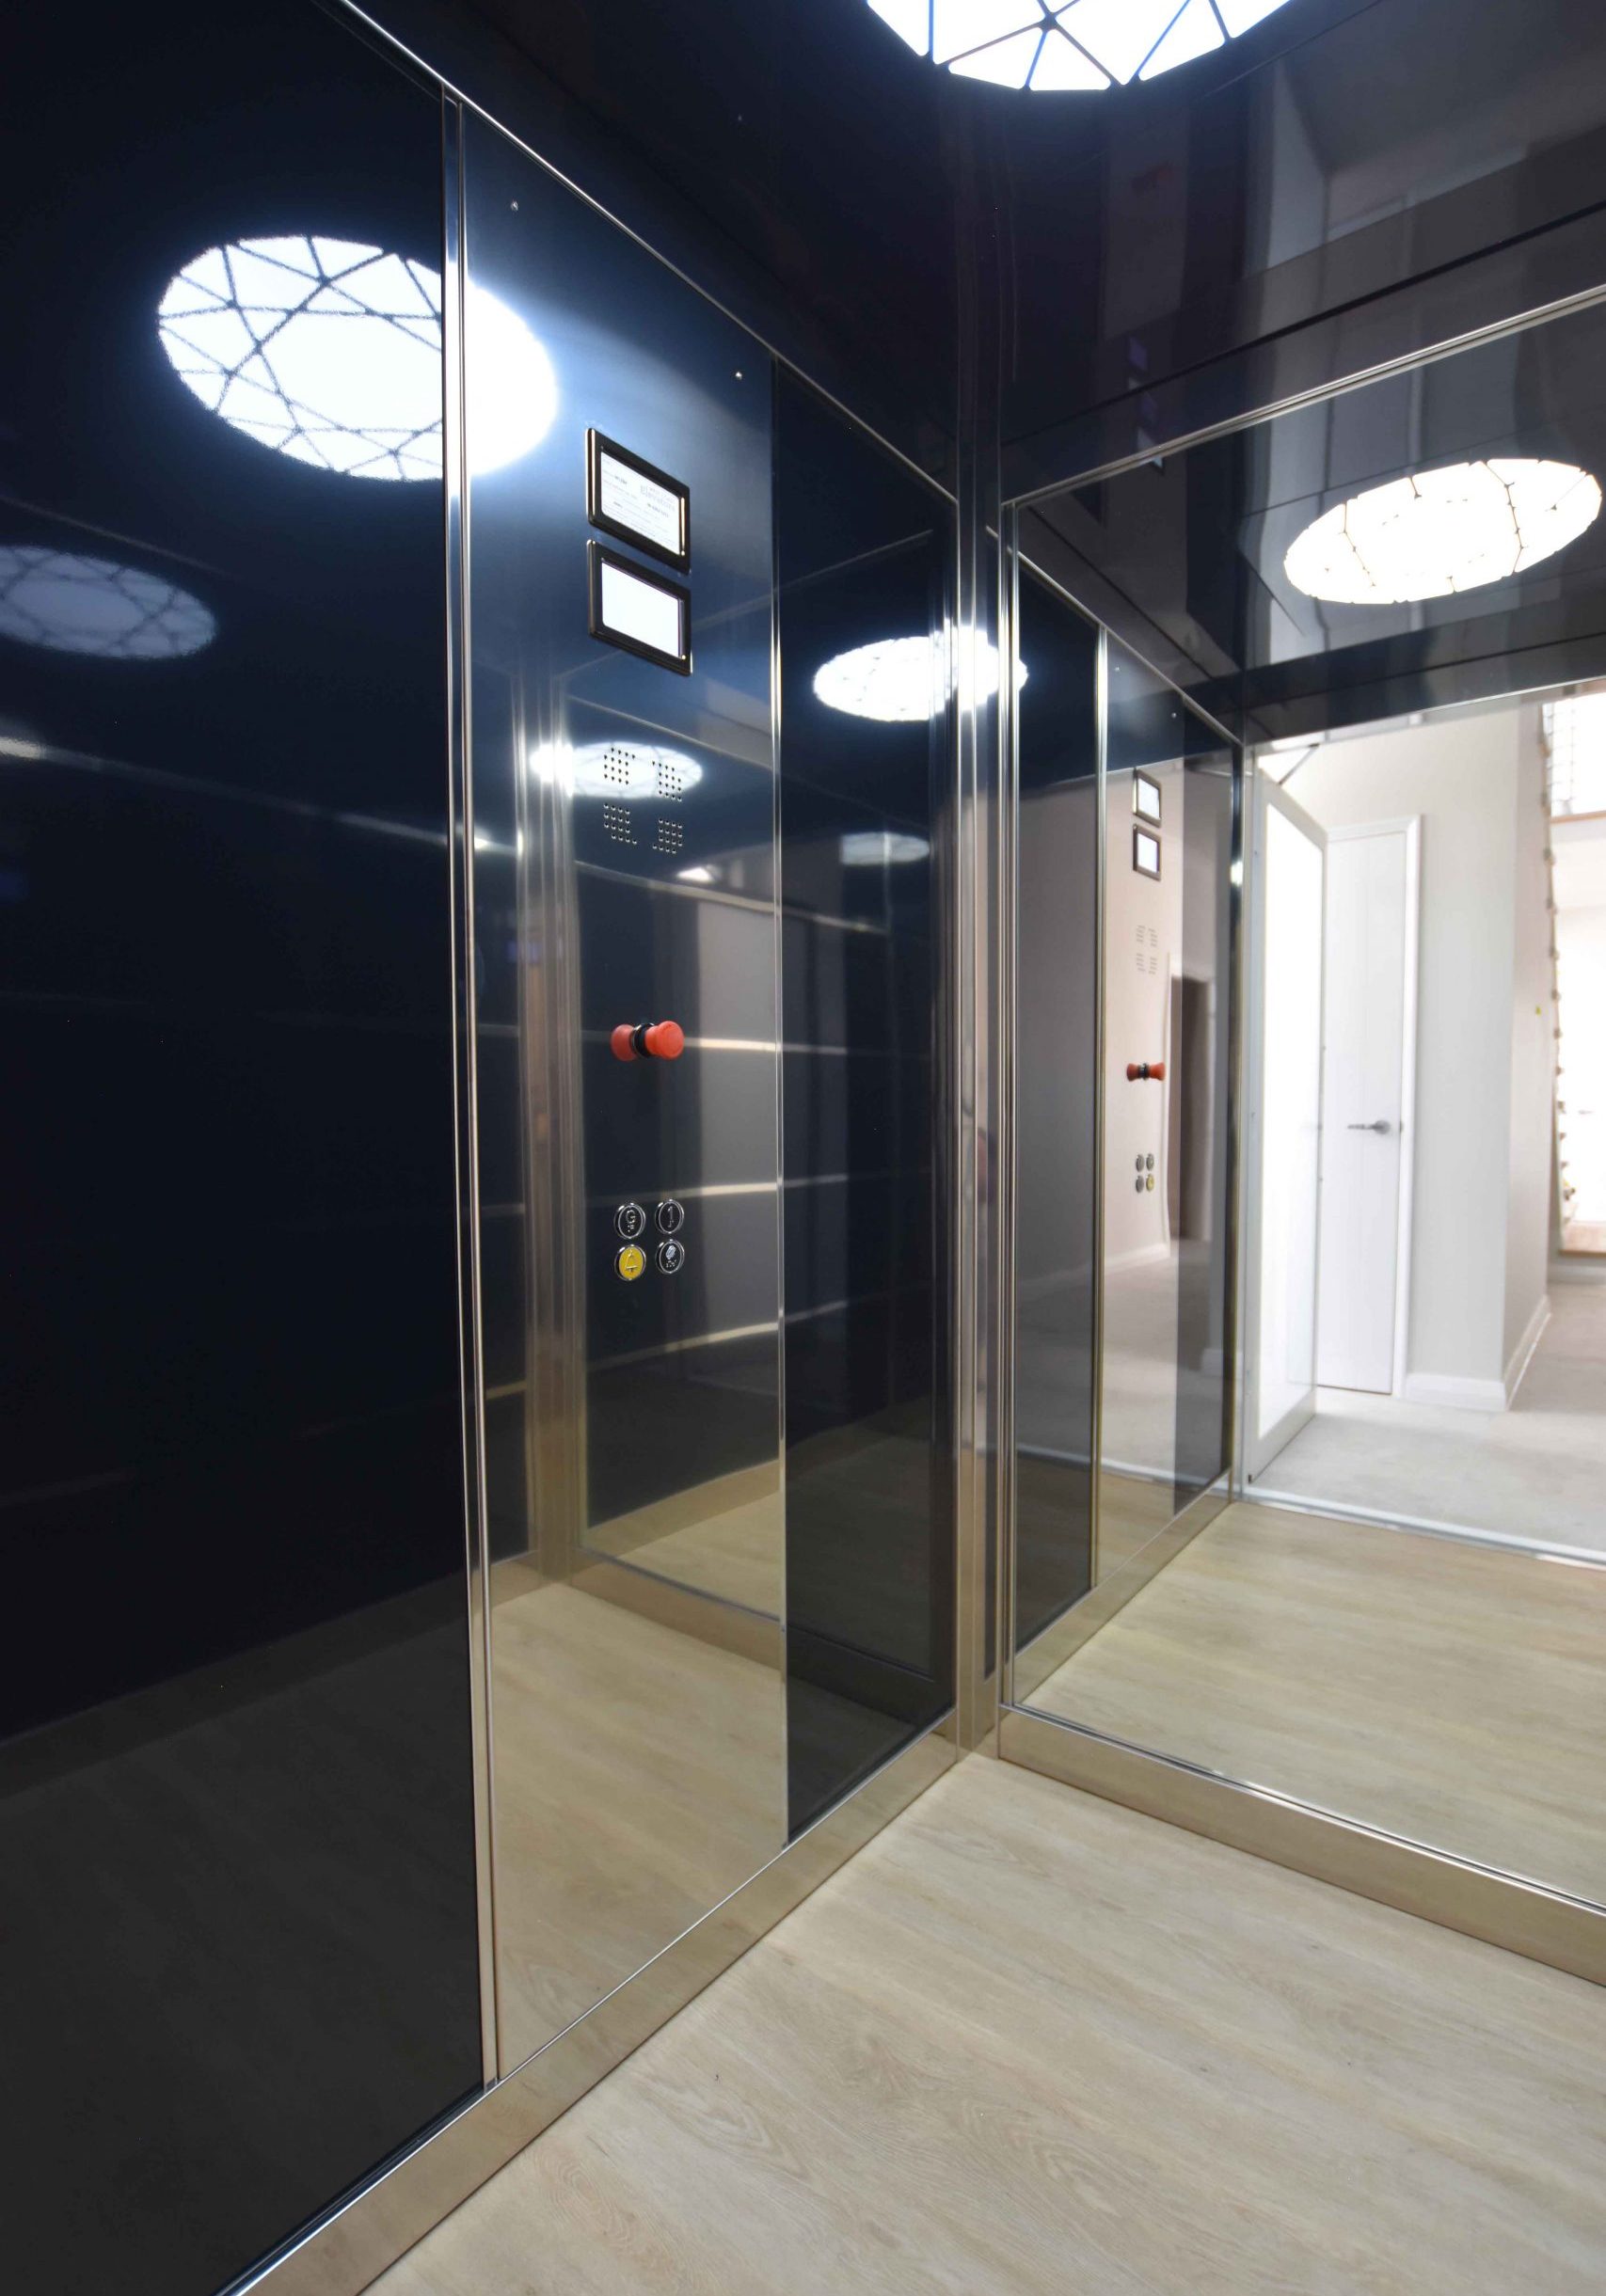 Inside of sovereign lift, with one large light, light wood floors, black features and reflective back wall.